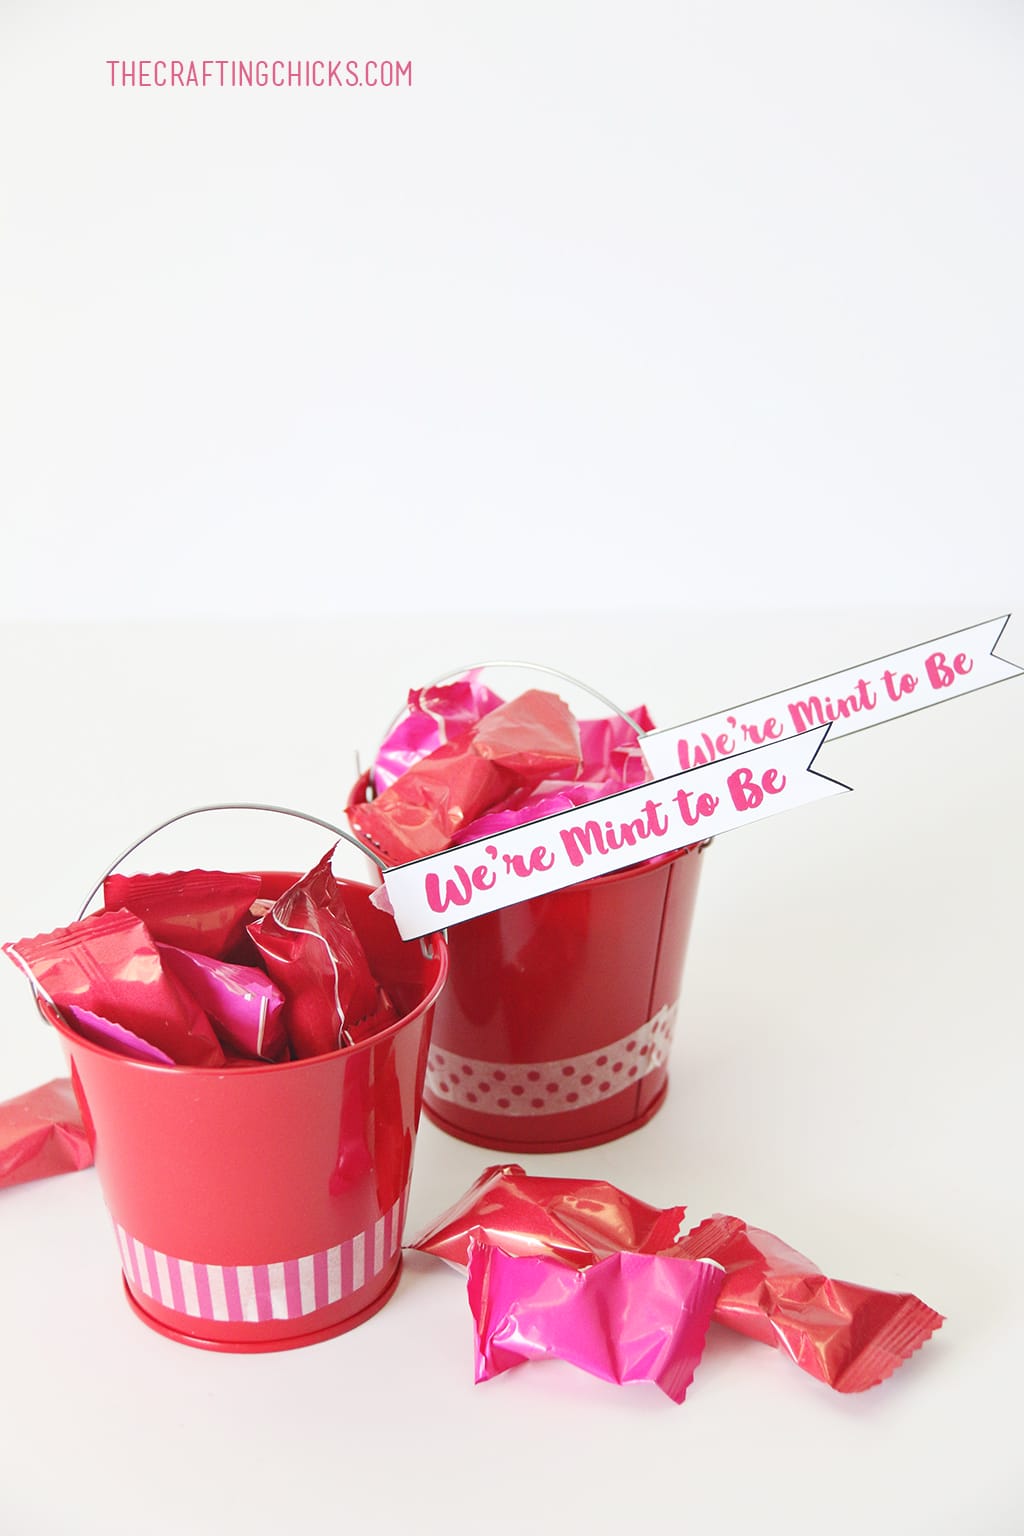 We're Mint to Be Printable Valentines are the perfect Valentine gift idea for friends and neighbors. These adorable buckets filled with mints or gum will be a hit with young and young at heart.